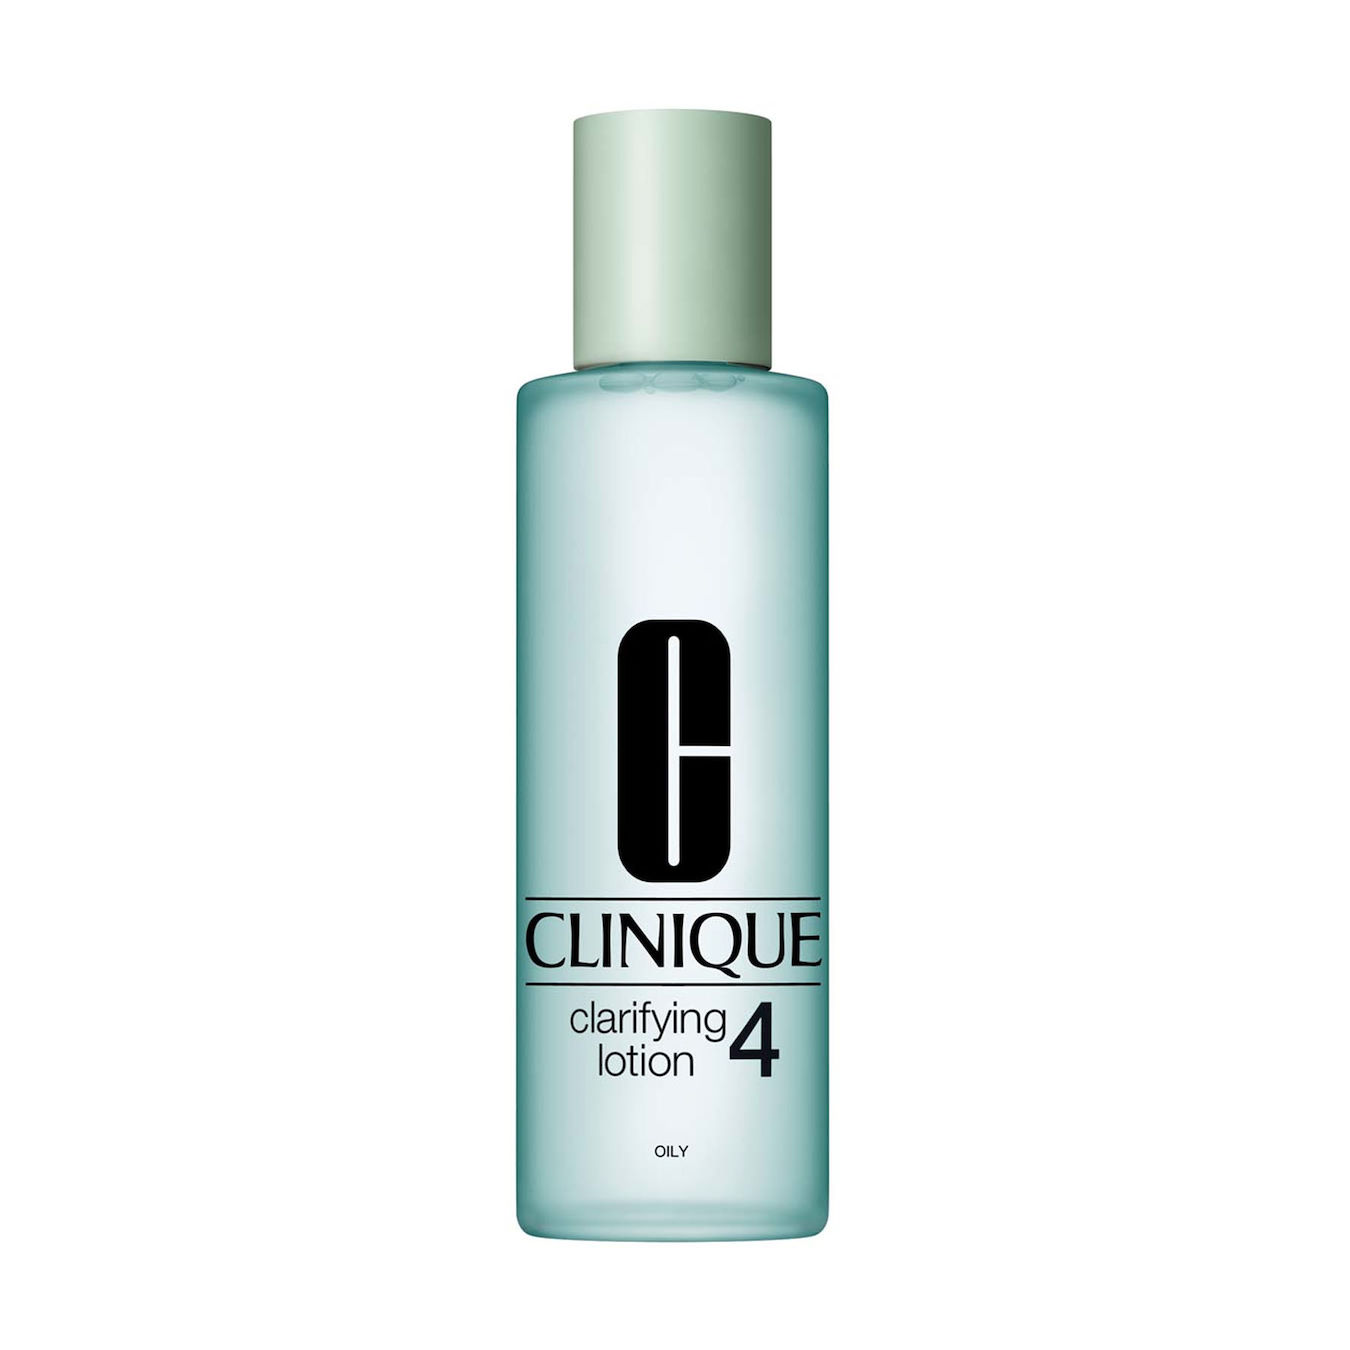 3-Step Skin Care - Clarifying Lotion 4